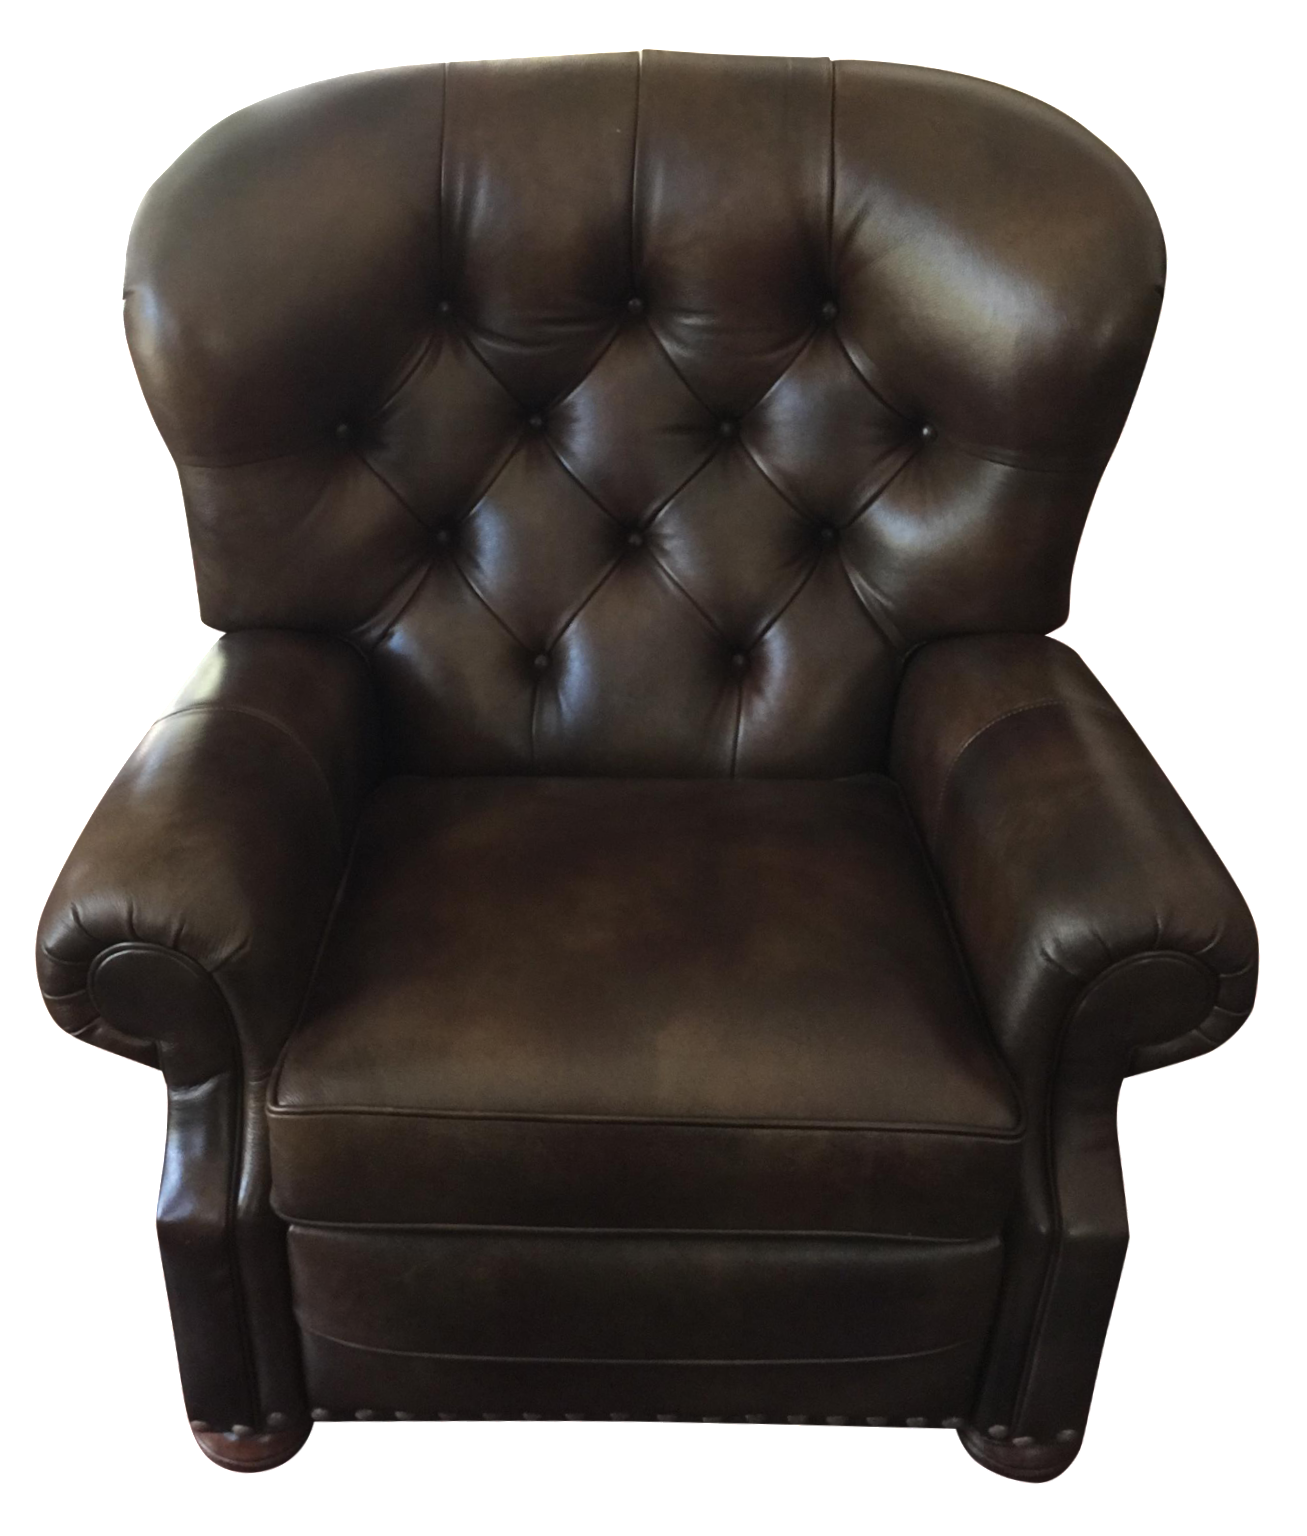 Cromwellian Chair HD Download Free Image PNG Image